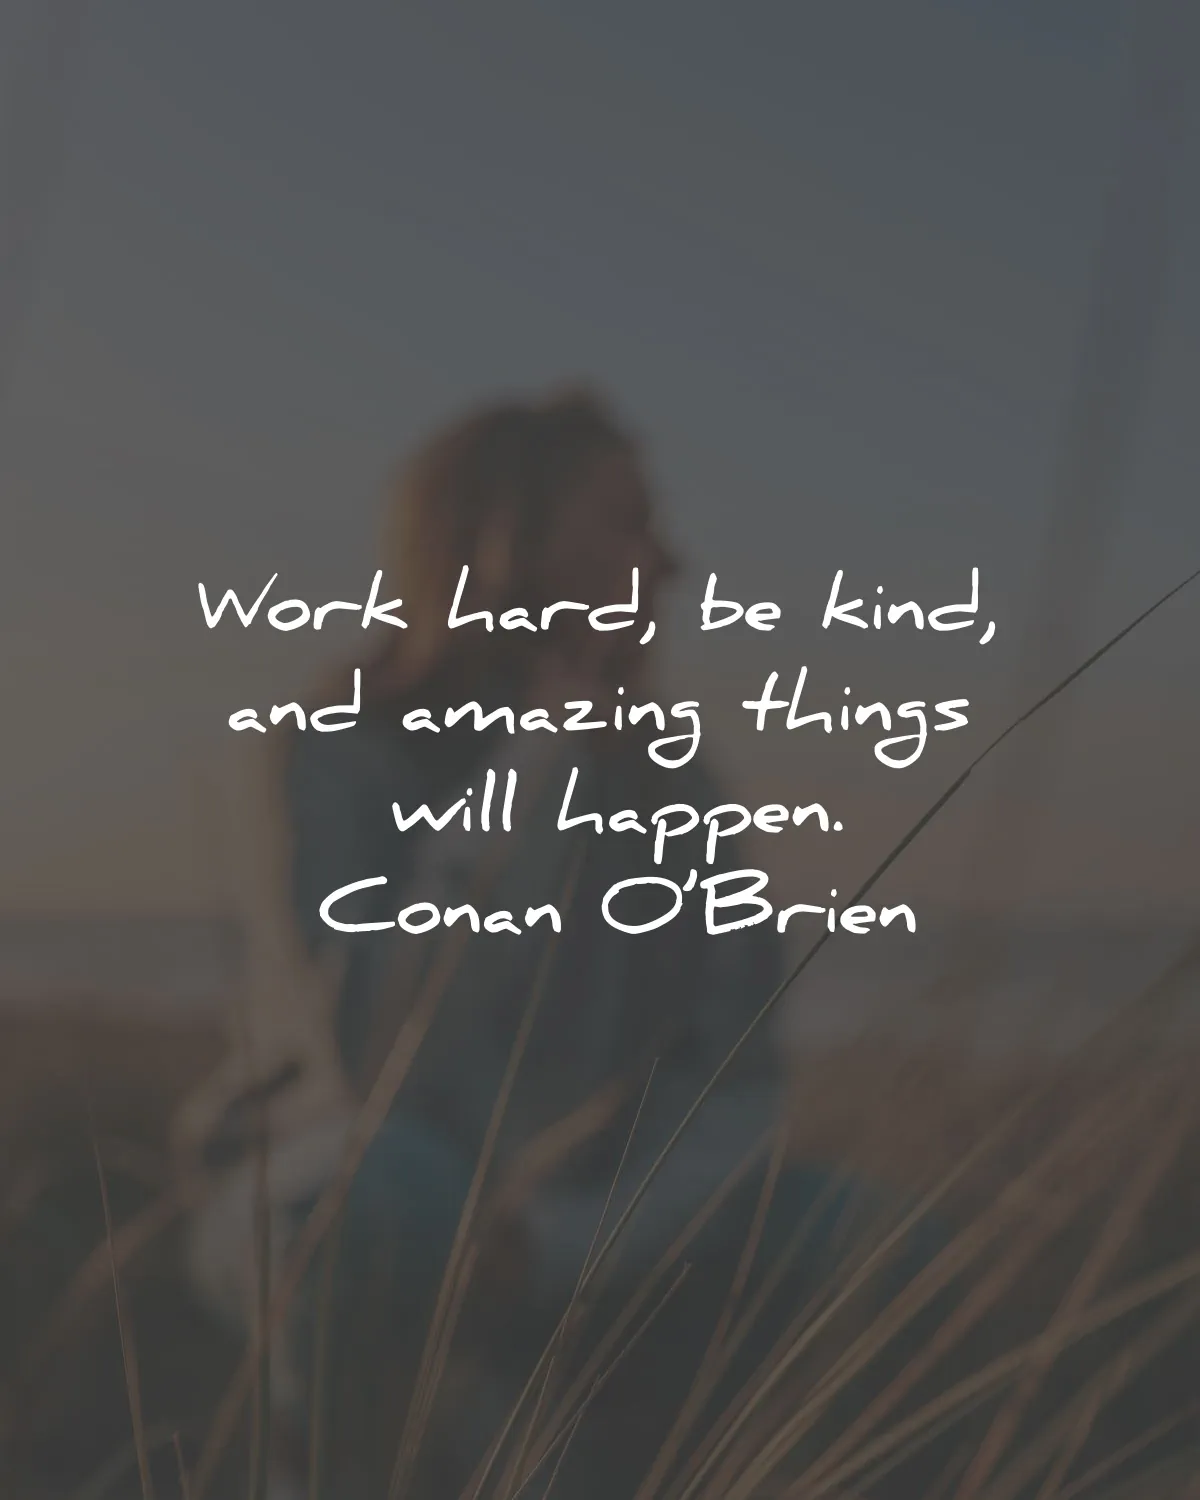 motivational quotes for success work hard kind amazing things happen conan obrien wisdom